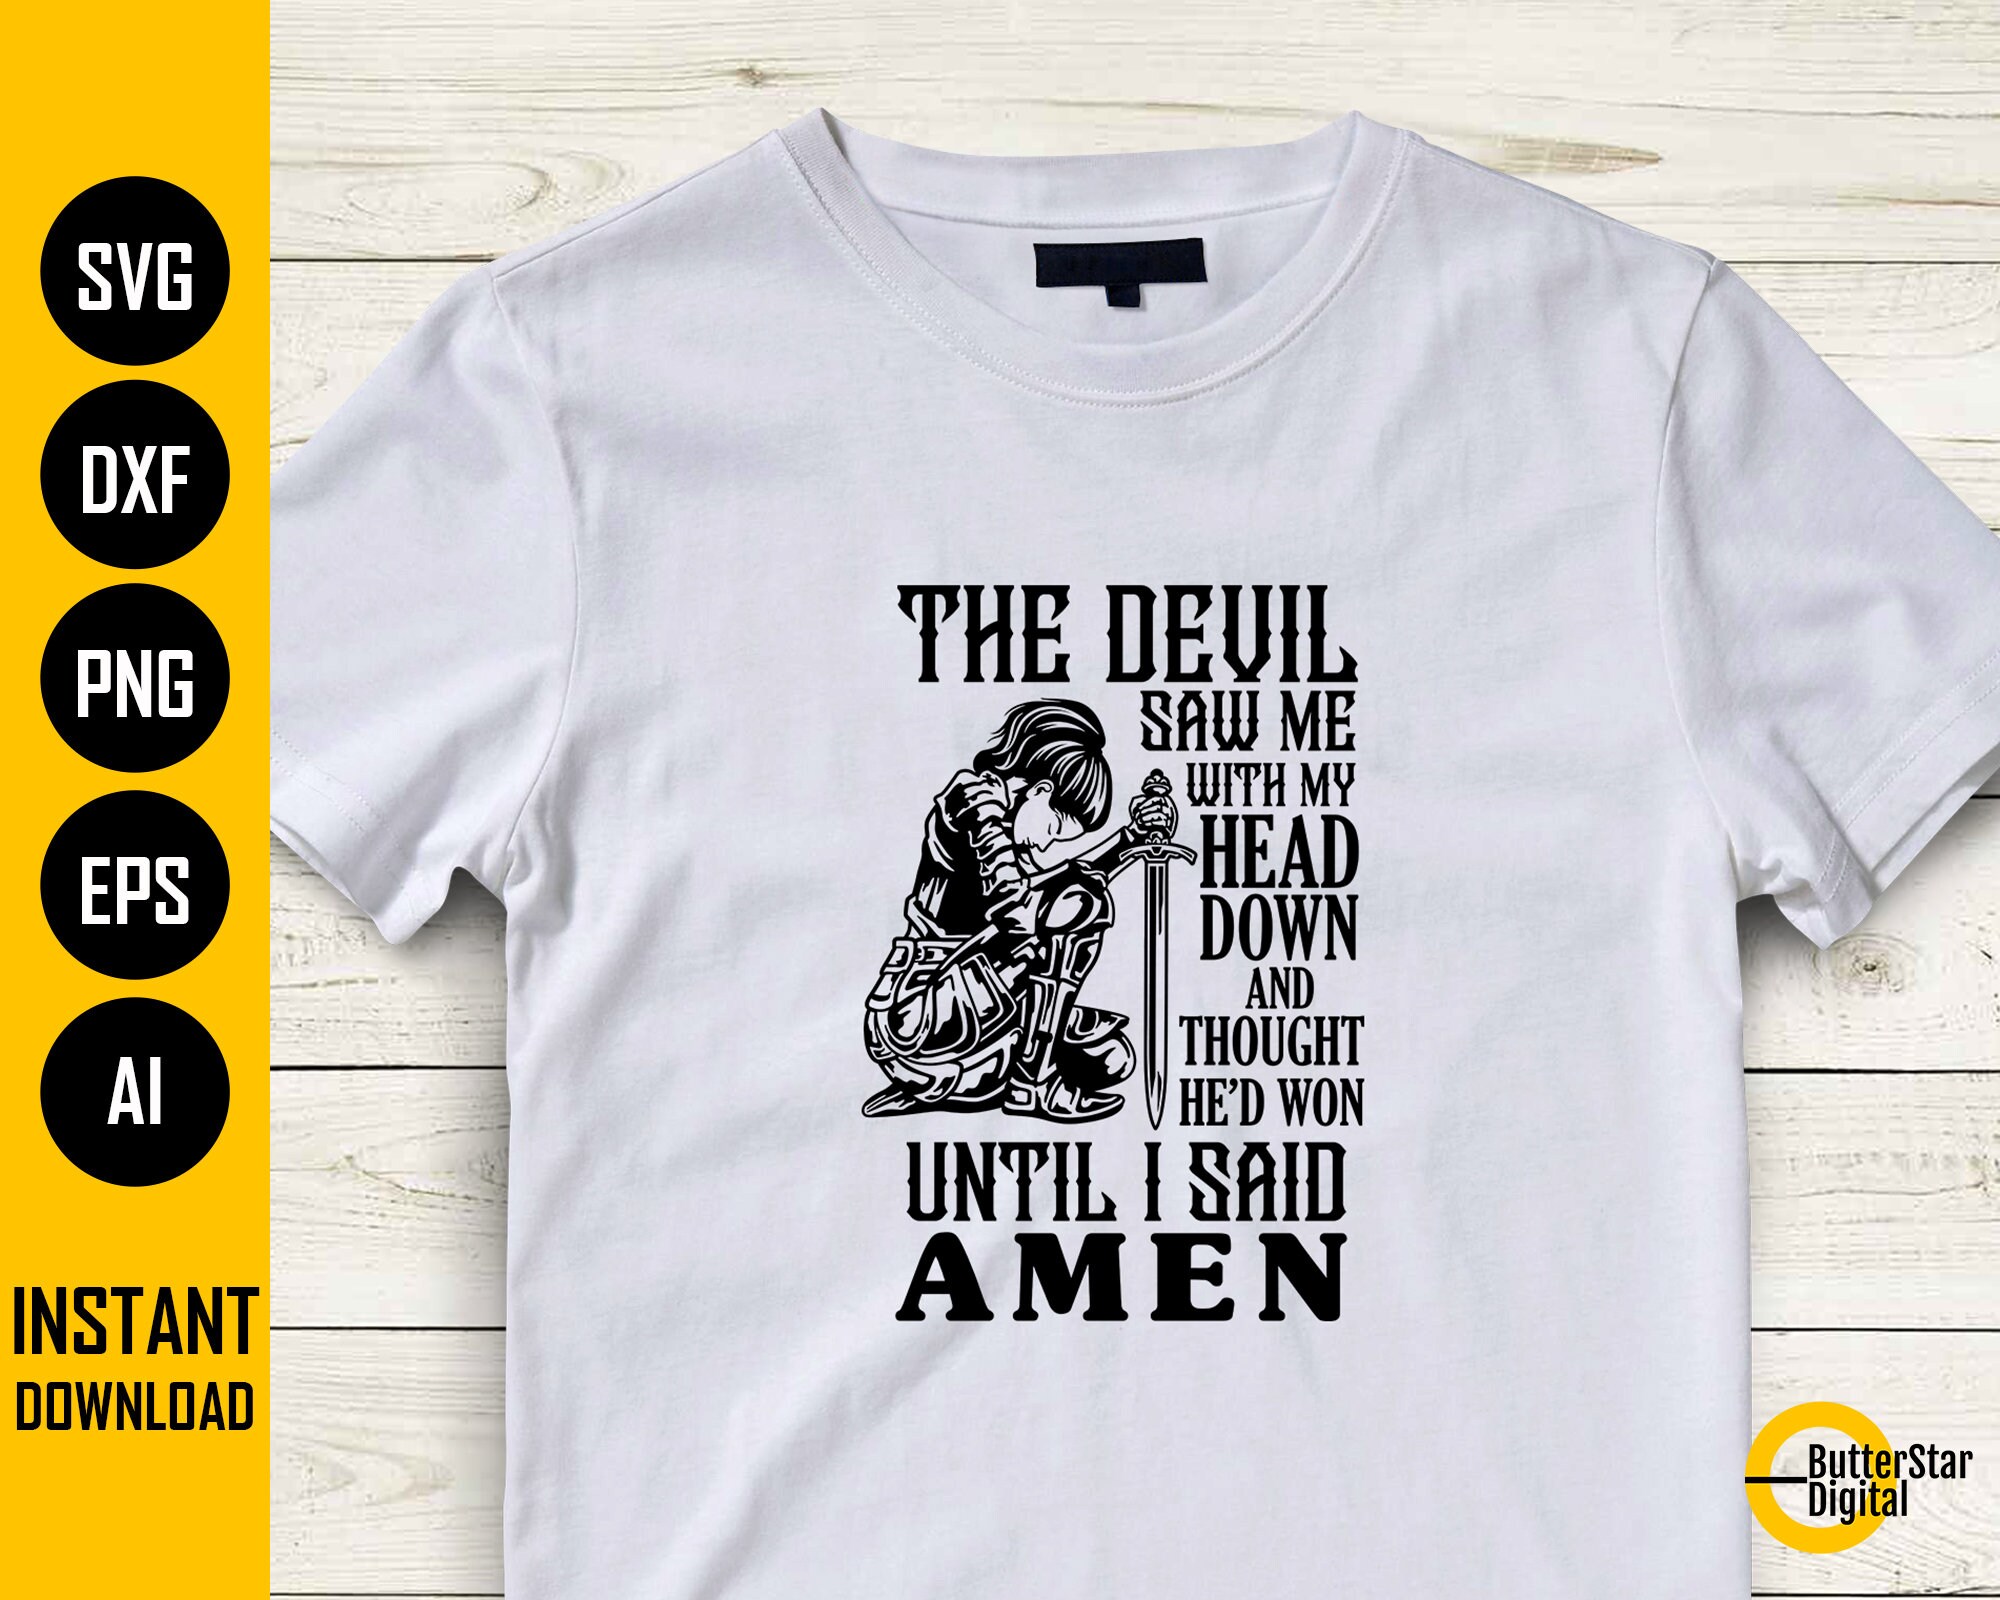 The Devil Saw Me With My Head Down and Thought He\'d Won Until I Said Amen  SVG T-shirt Decal Cut File Clip Art Vector Digital Dxf Png Eps Ai - Etsy